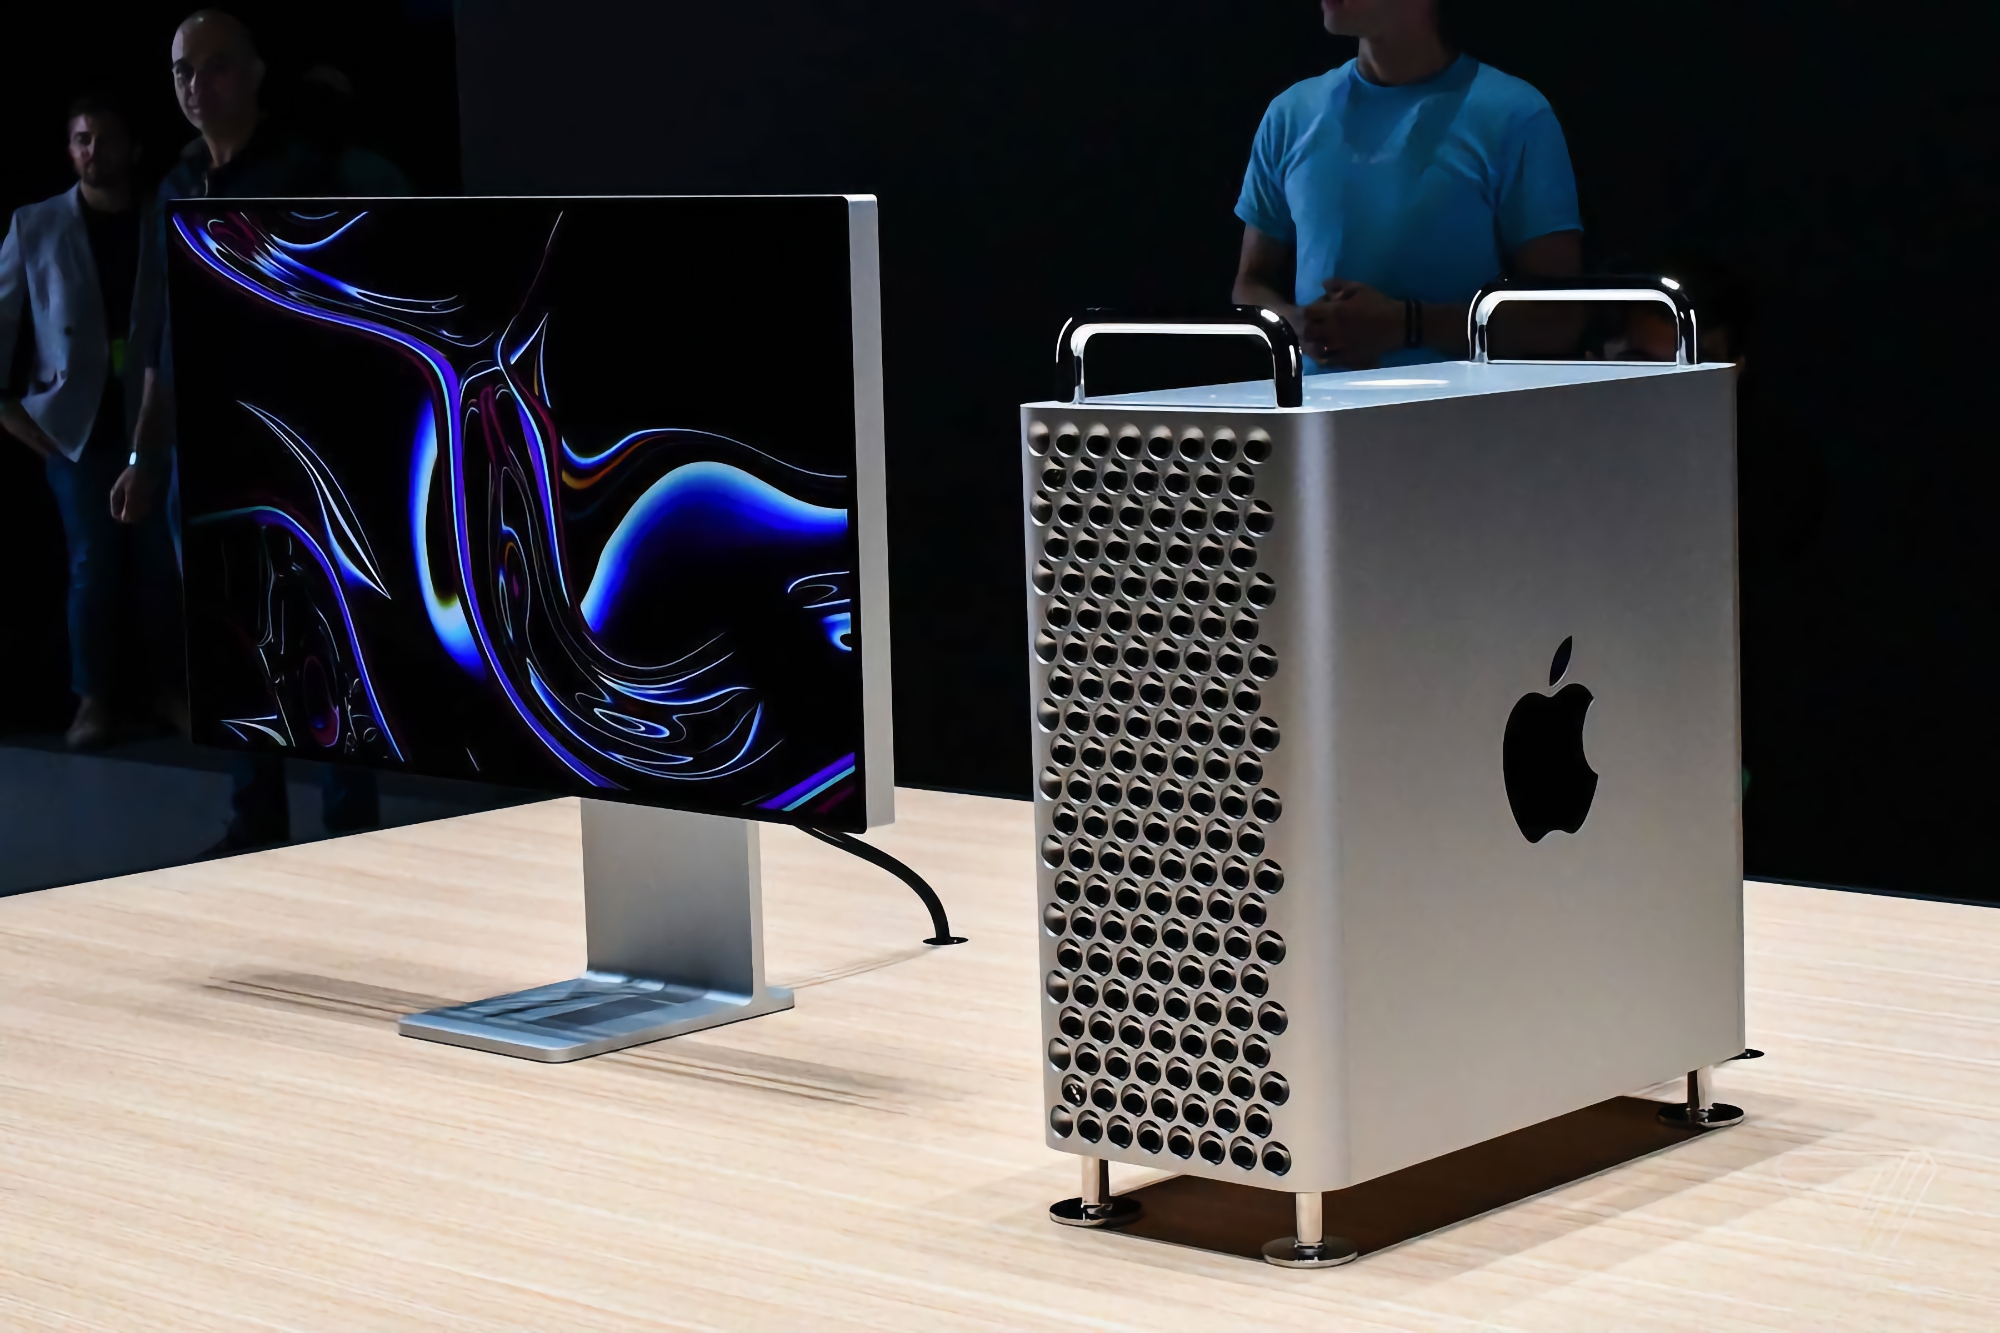 Bloomberg: Apple tests new Mac Pro with unannounced 24-core processor and 192GB of RAM